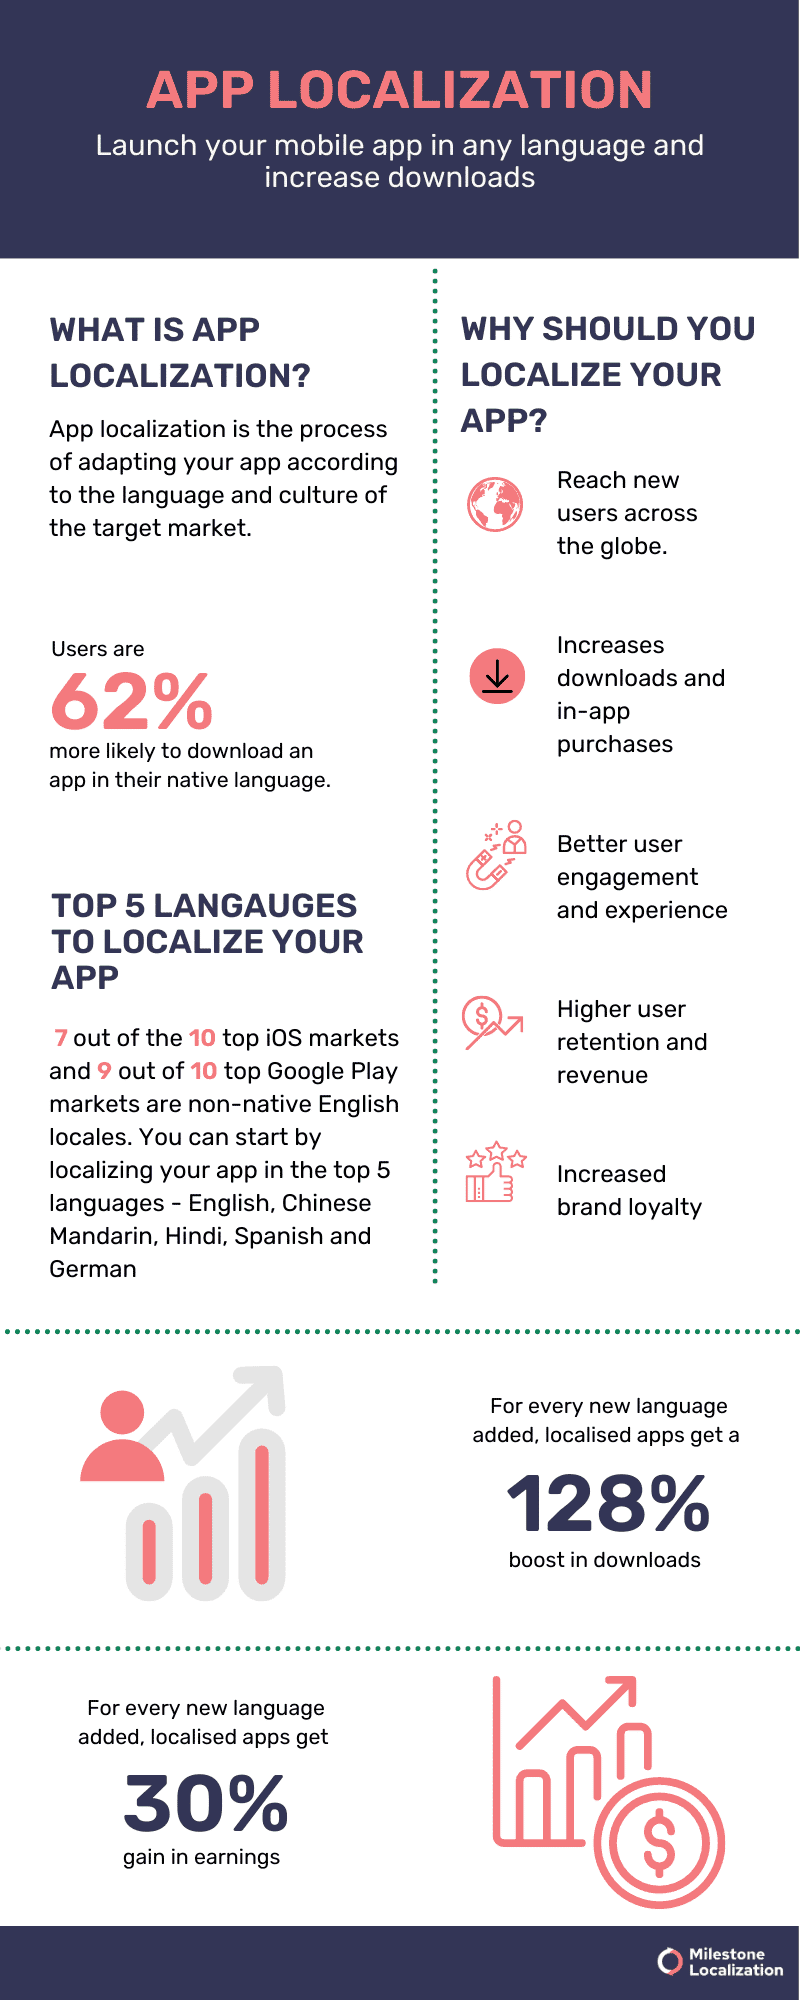 Localize your App - App Localization infographic